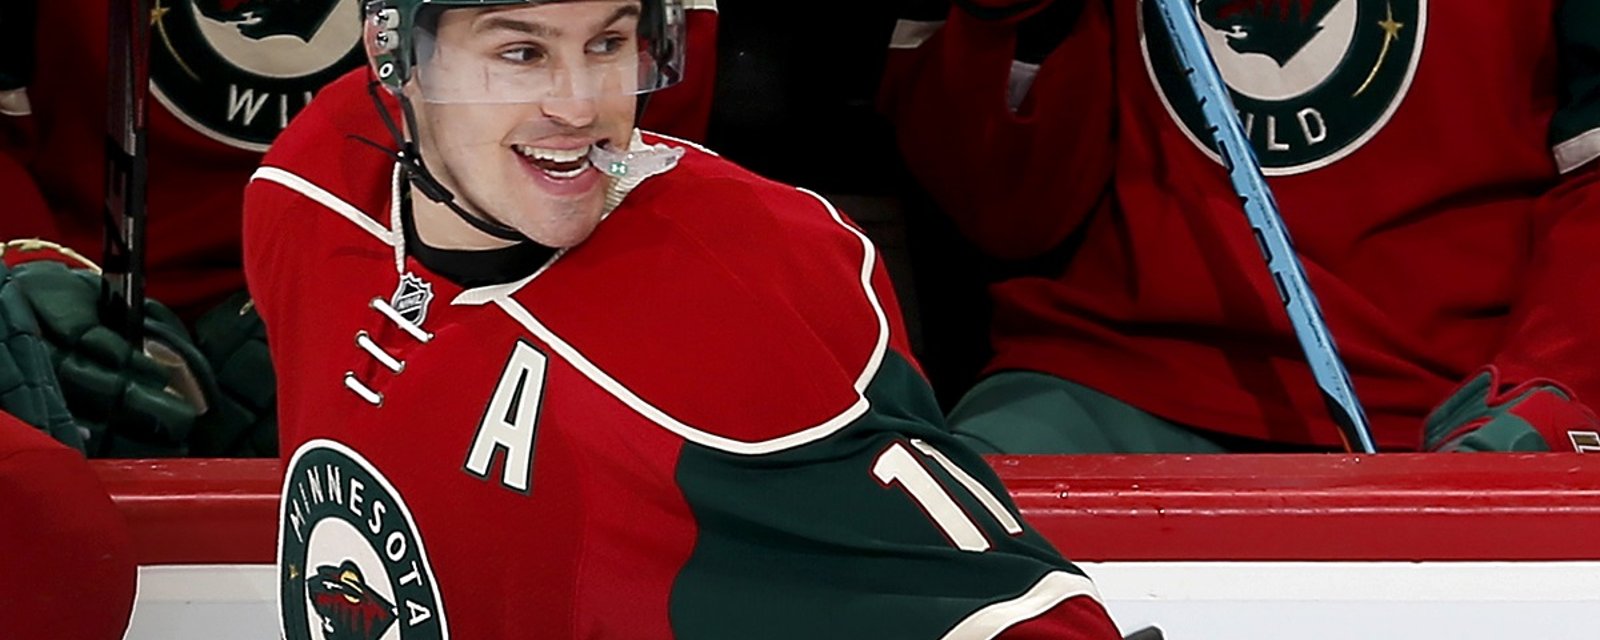 Breaking: Parise drops a bombshell update on New Year's Day!